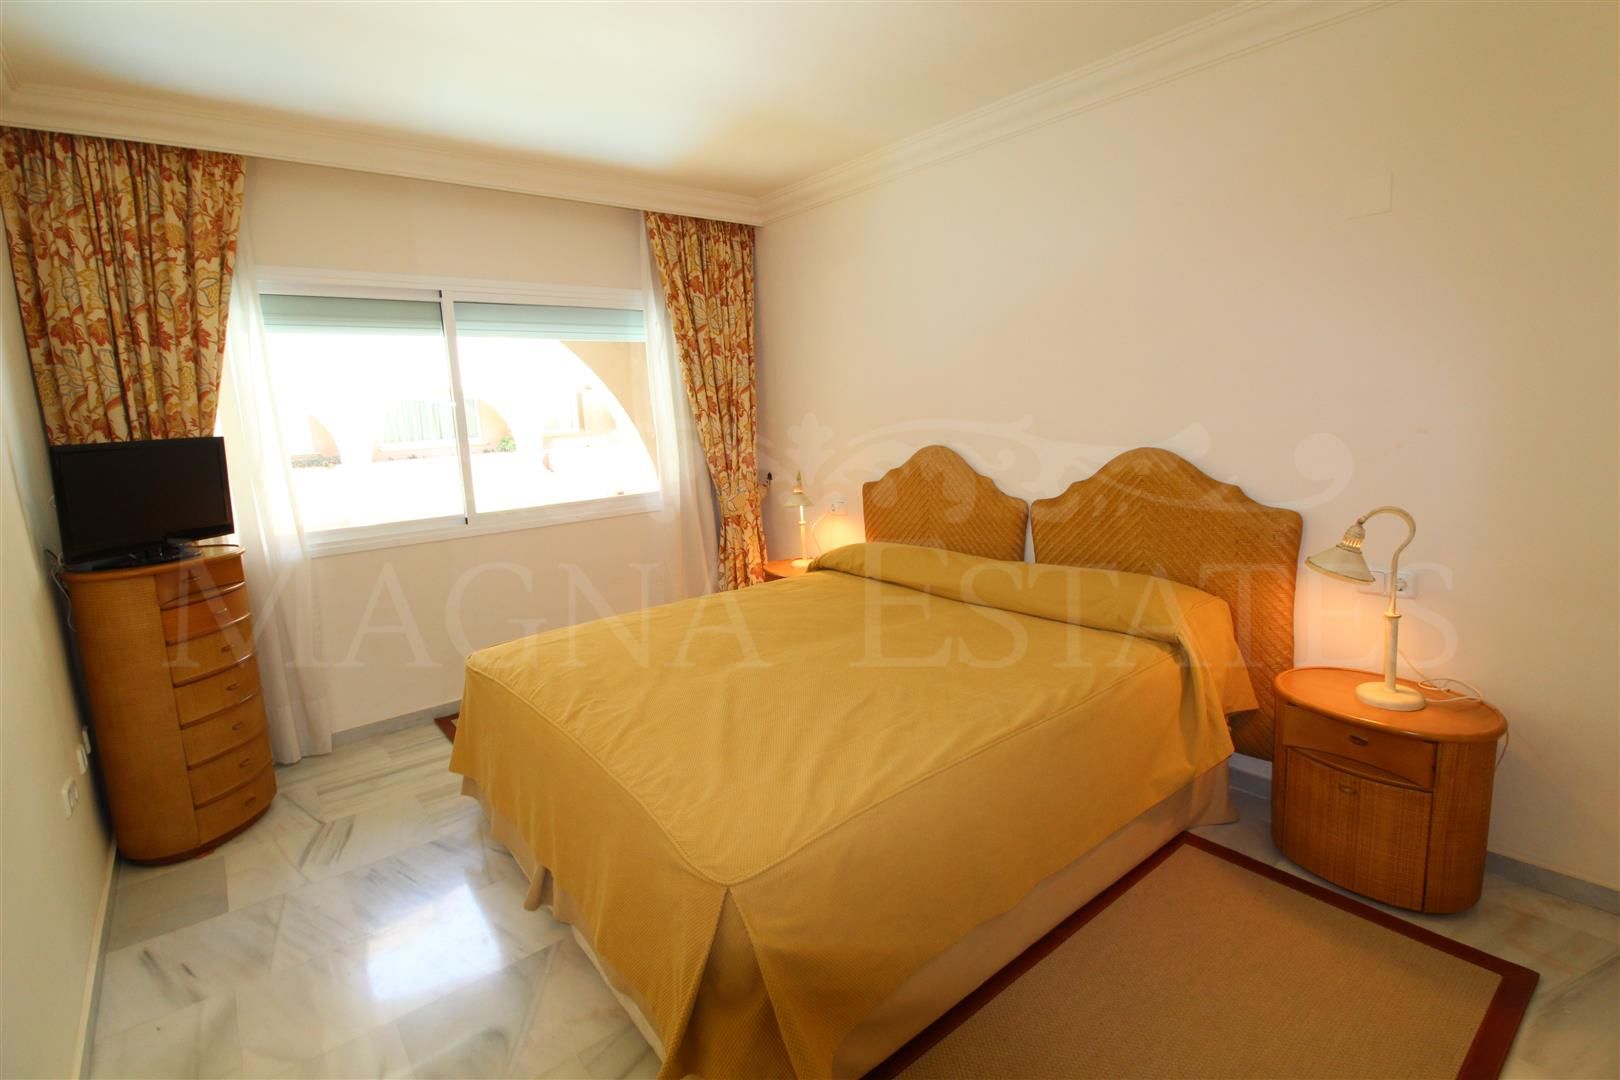 Apartment in Magna Marbella with golf membership included in the price